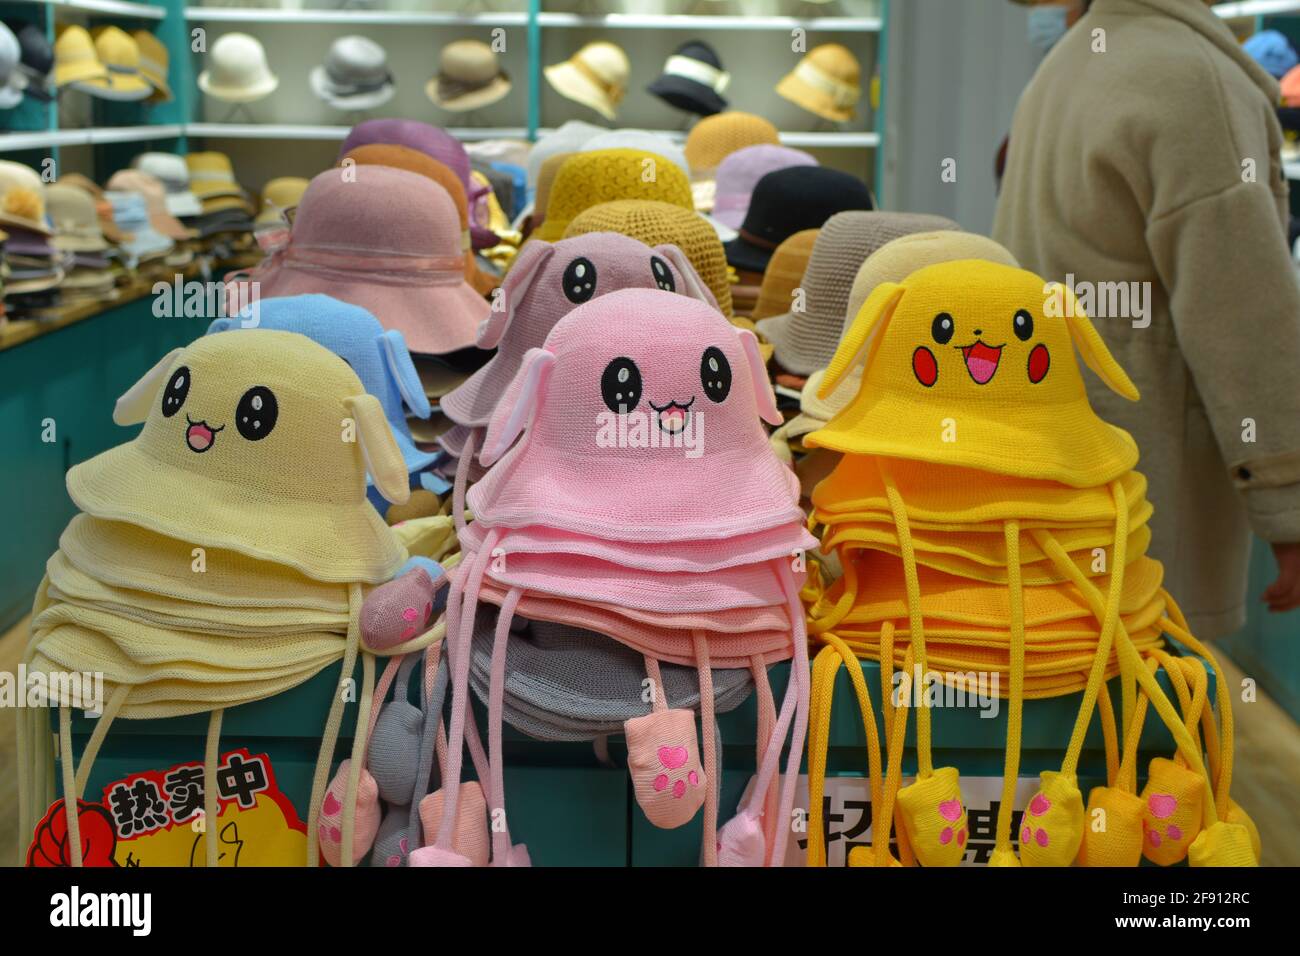 Happy hats for sale in a shop. Bright and colourful faces create an eye catching display. Stock Photo